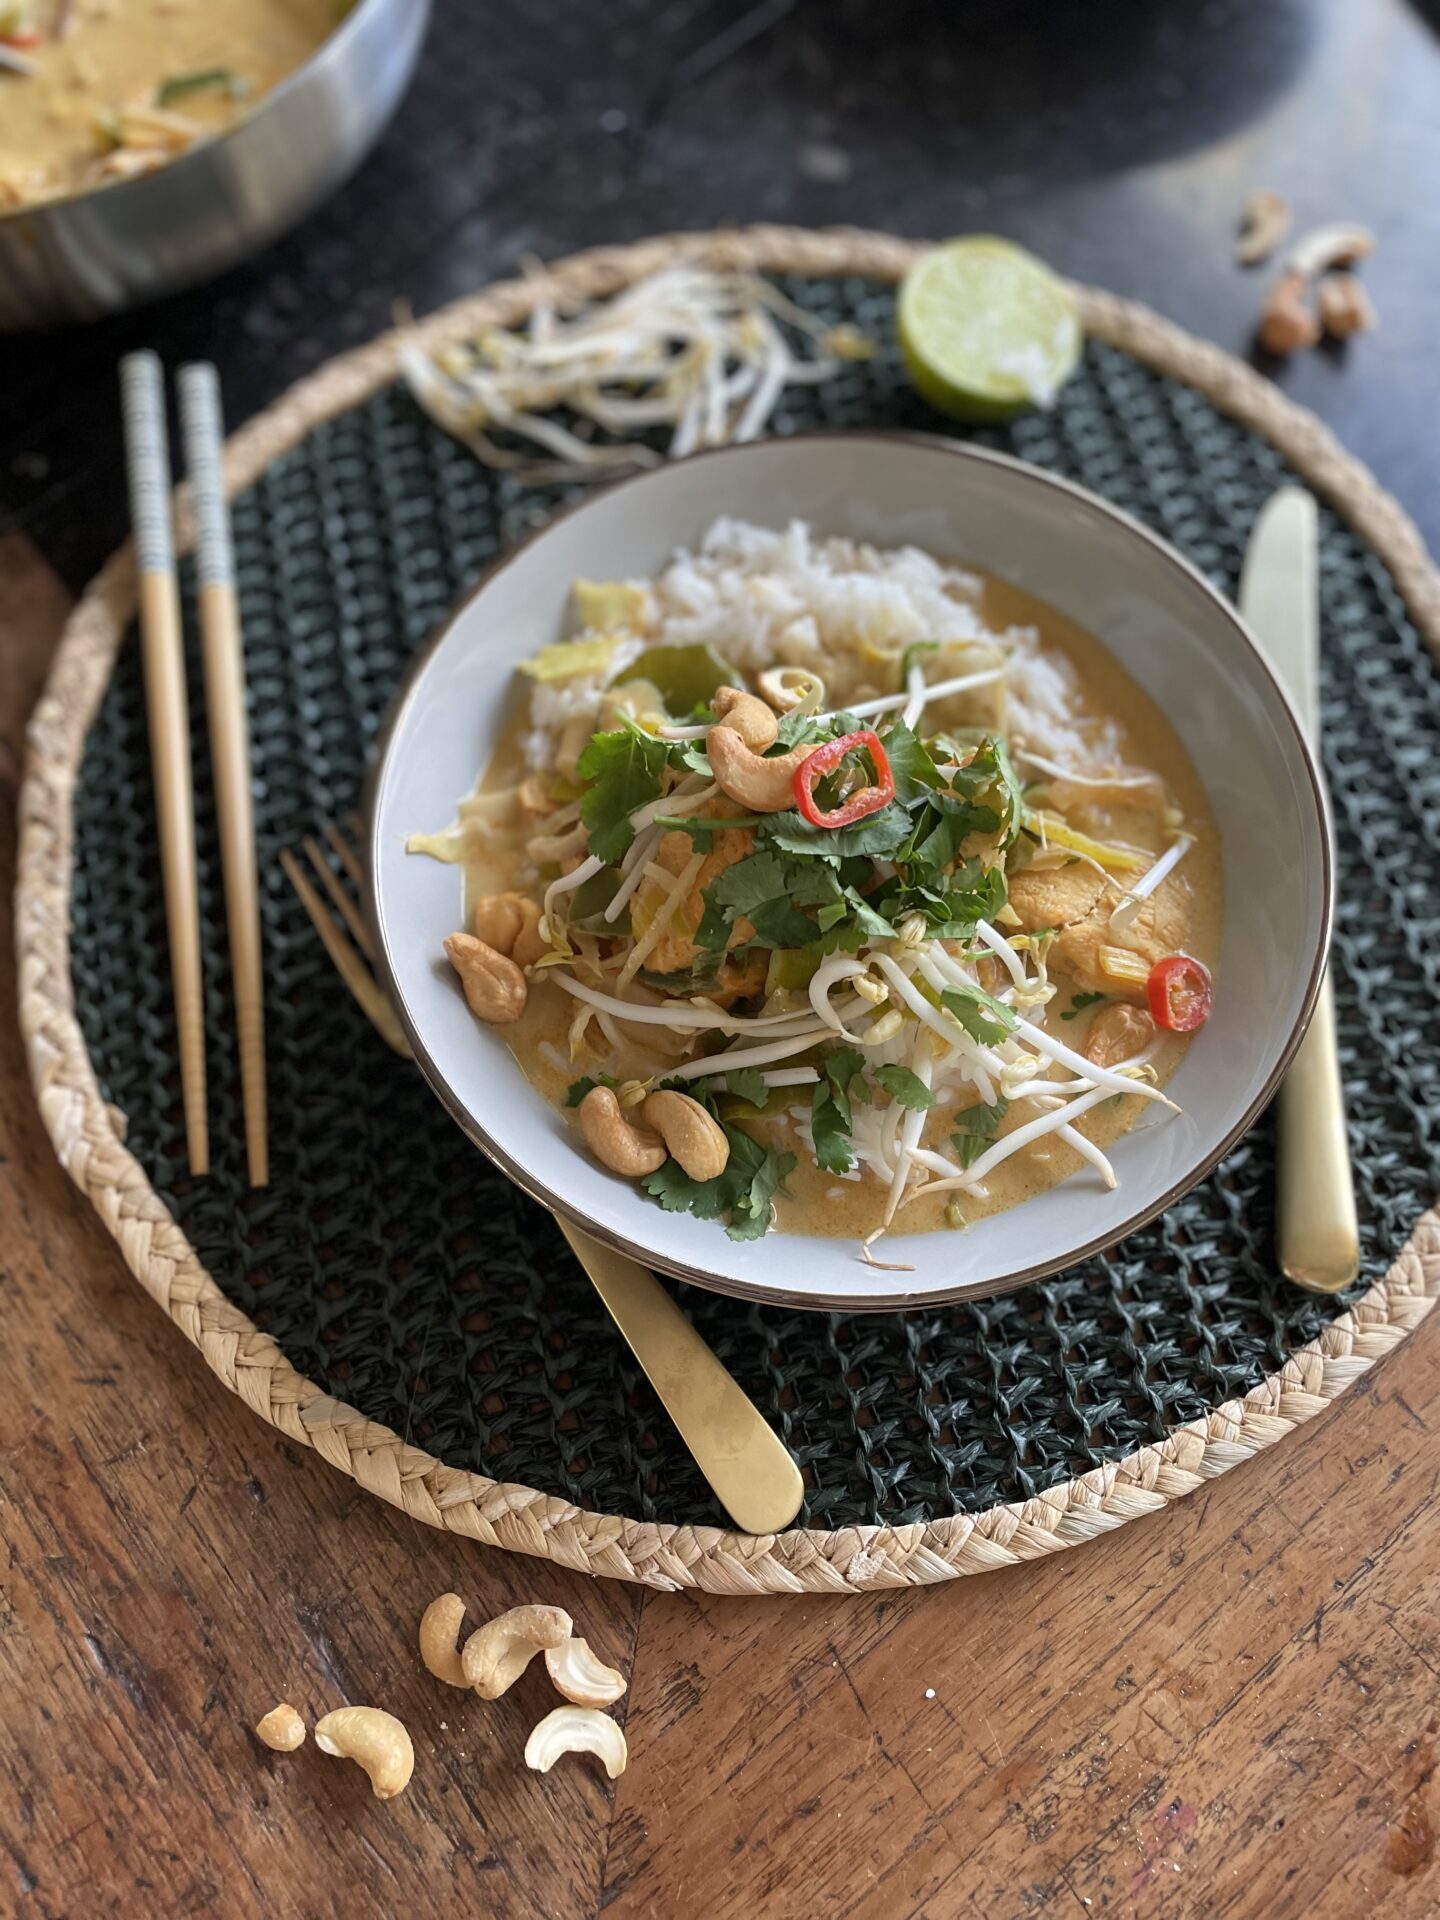 Thaise rode curry met kip - Foodblog Foodinista